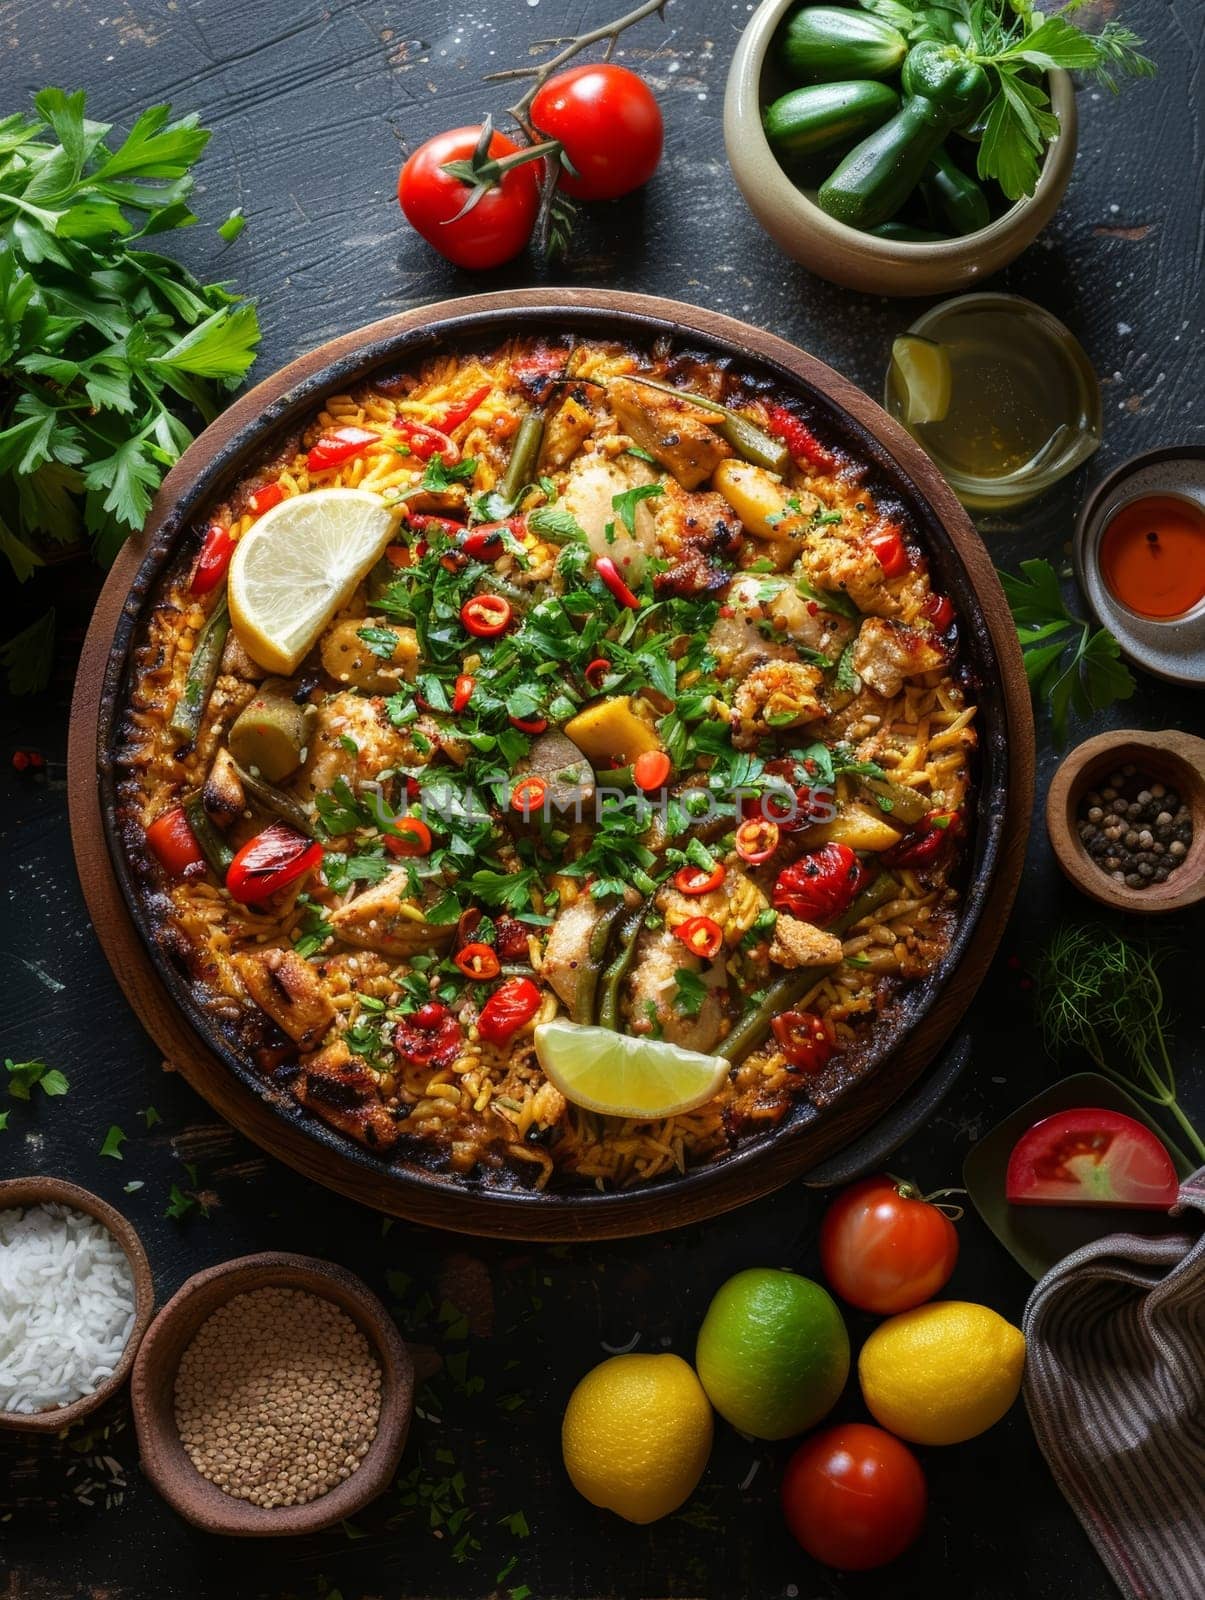 Maqluba, a traditional Palestinian upside-down rice dish, featuring layers of fluffy basmati rice, tender chicken, and a variety of aromatic vegetables, presented in a large serving dish. by sfinks